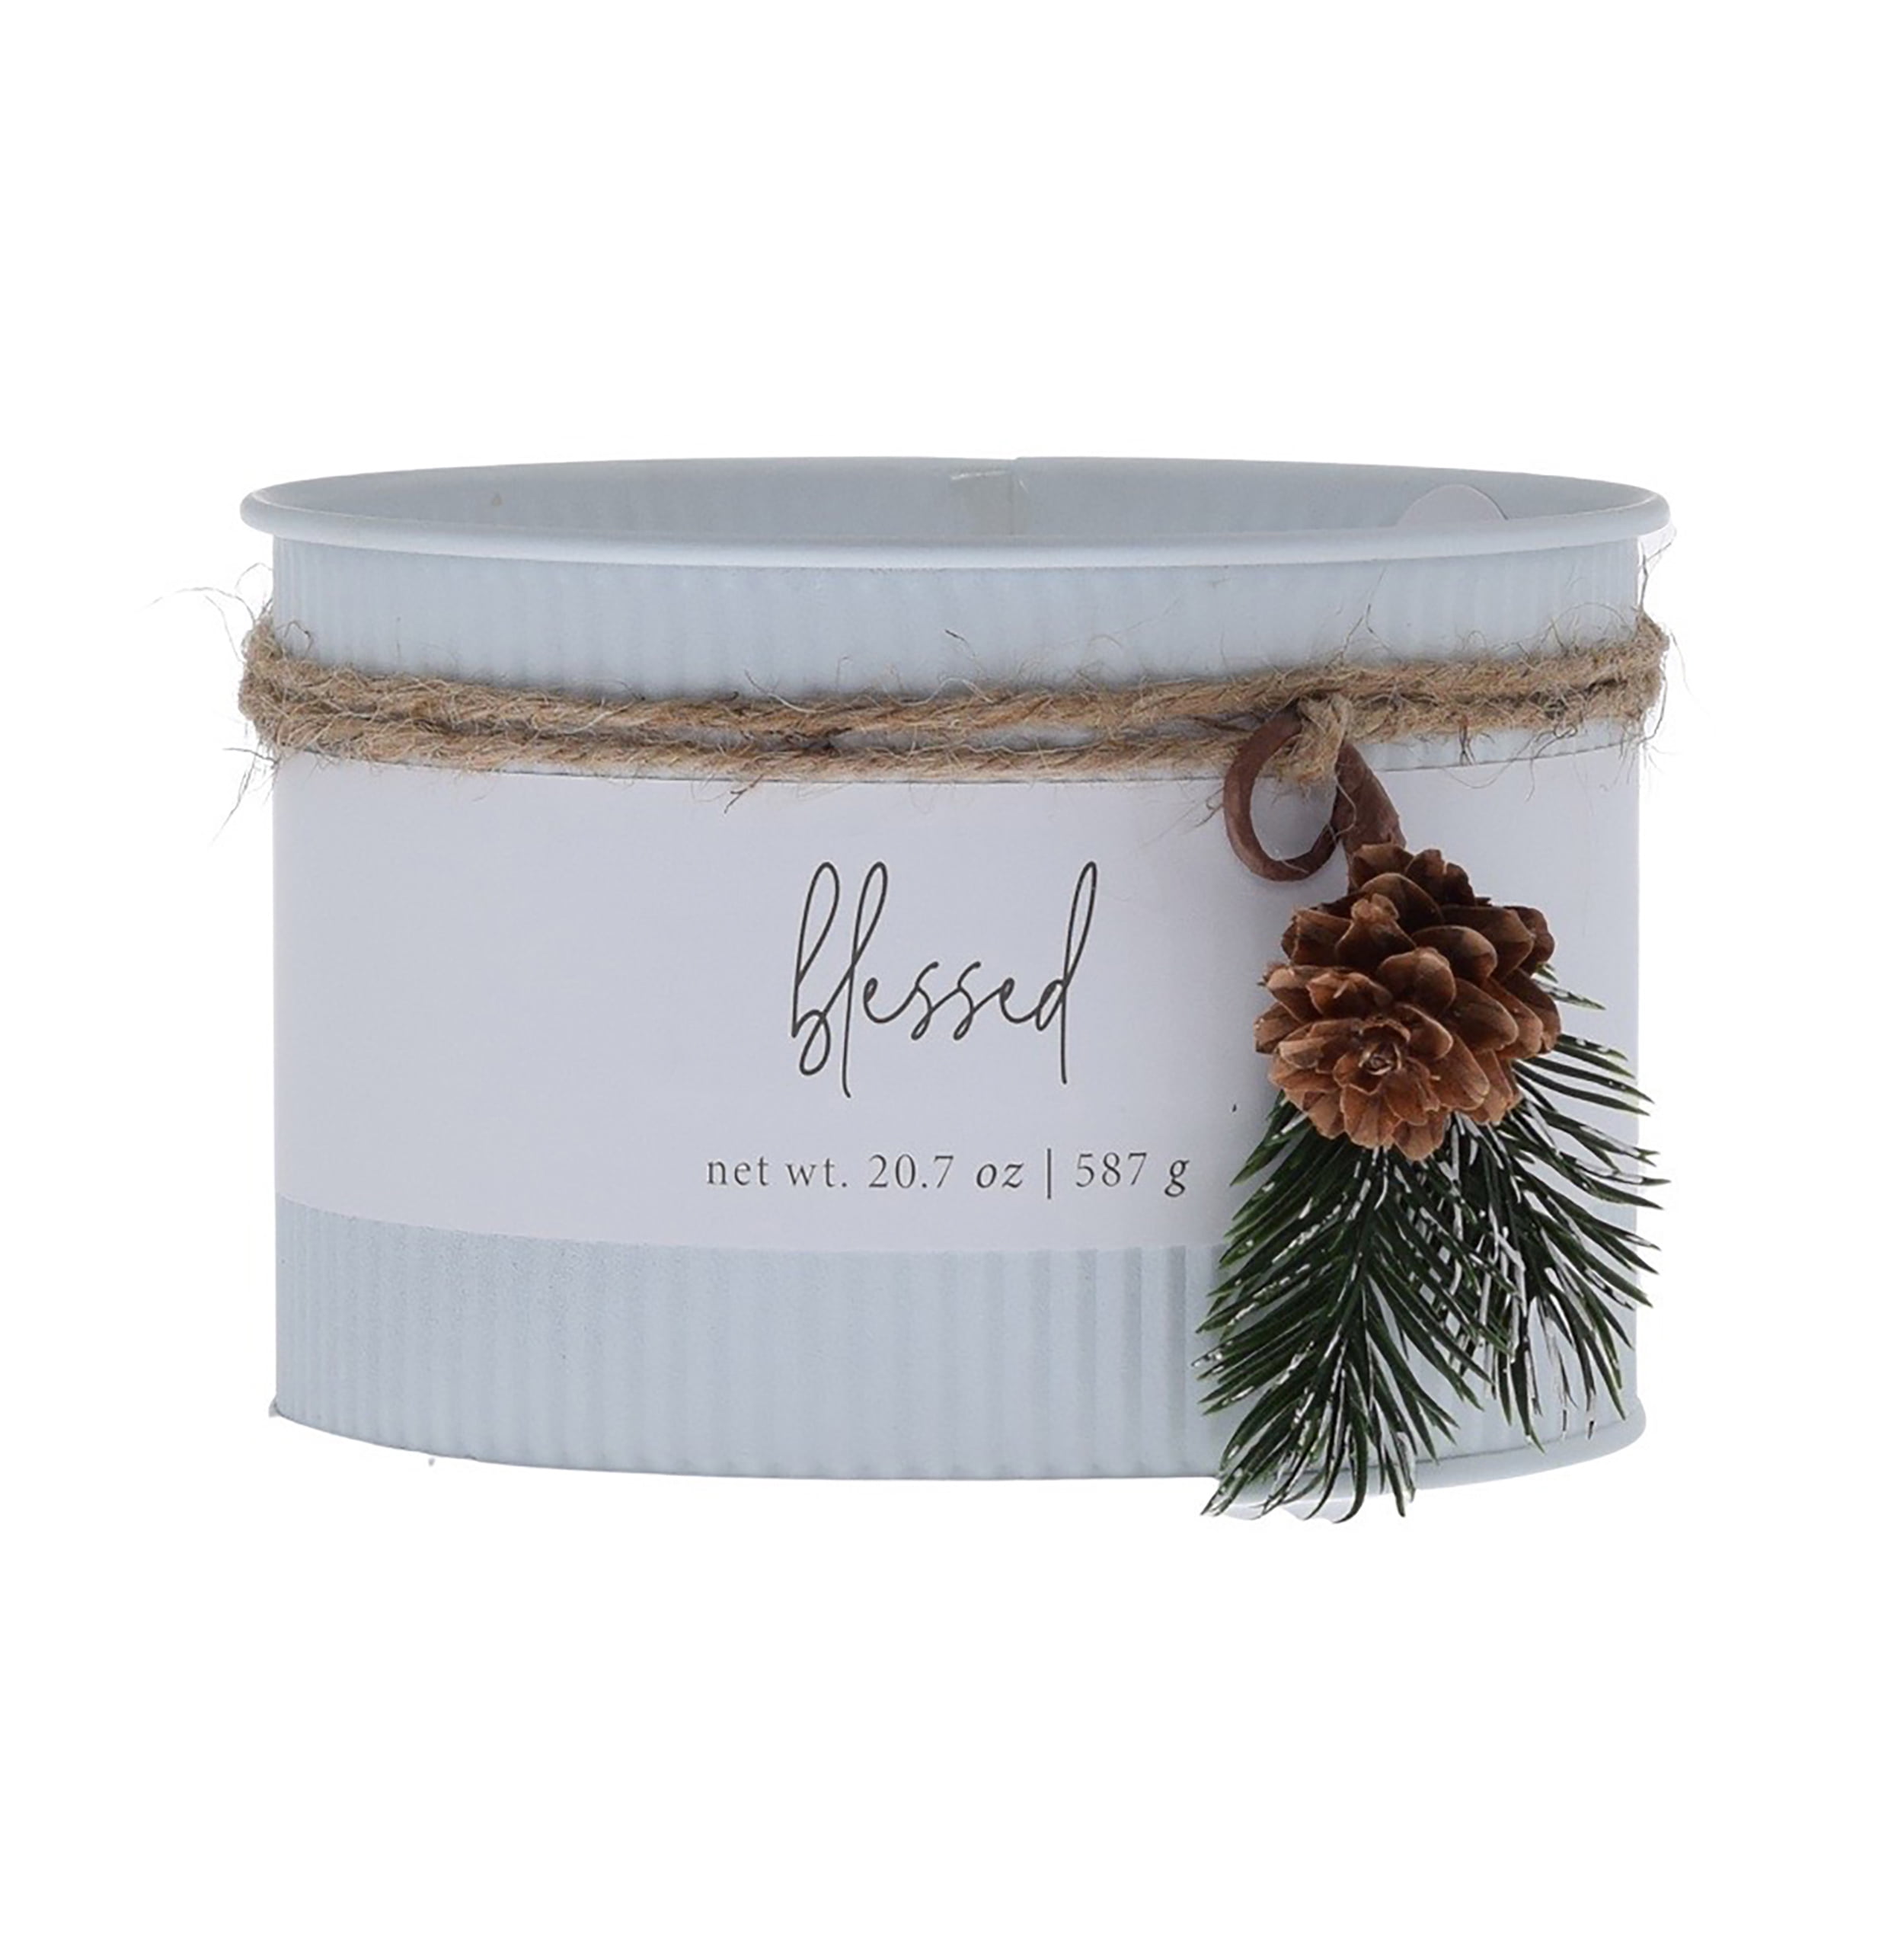 Better Homes & Gardens 21oz Vanilla Bean & Pumpkin Scented 3-Wick Tin 'Blessed' Bell Jar Candle